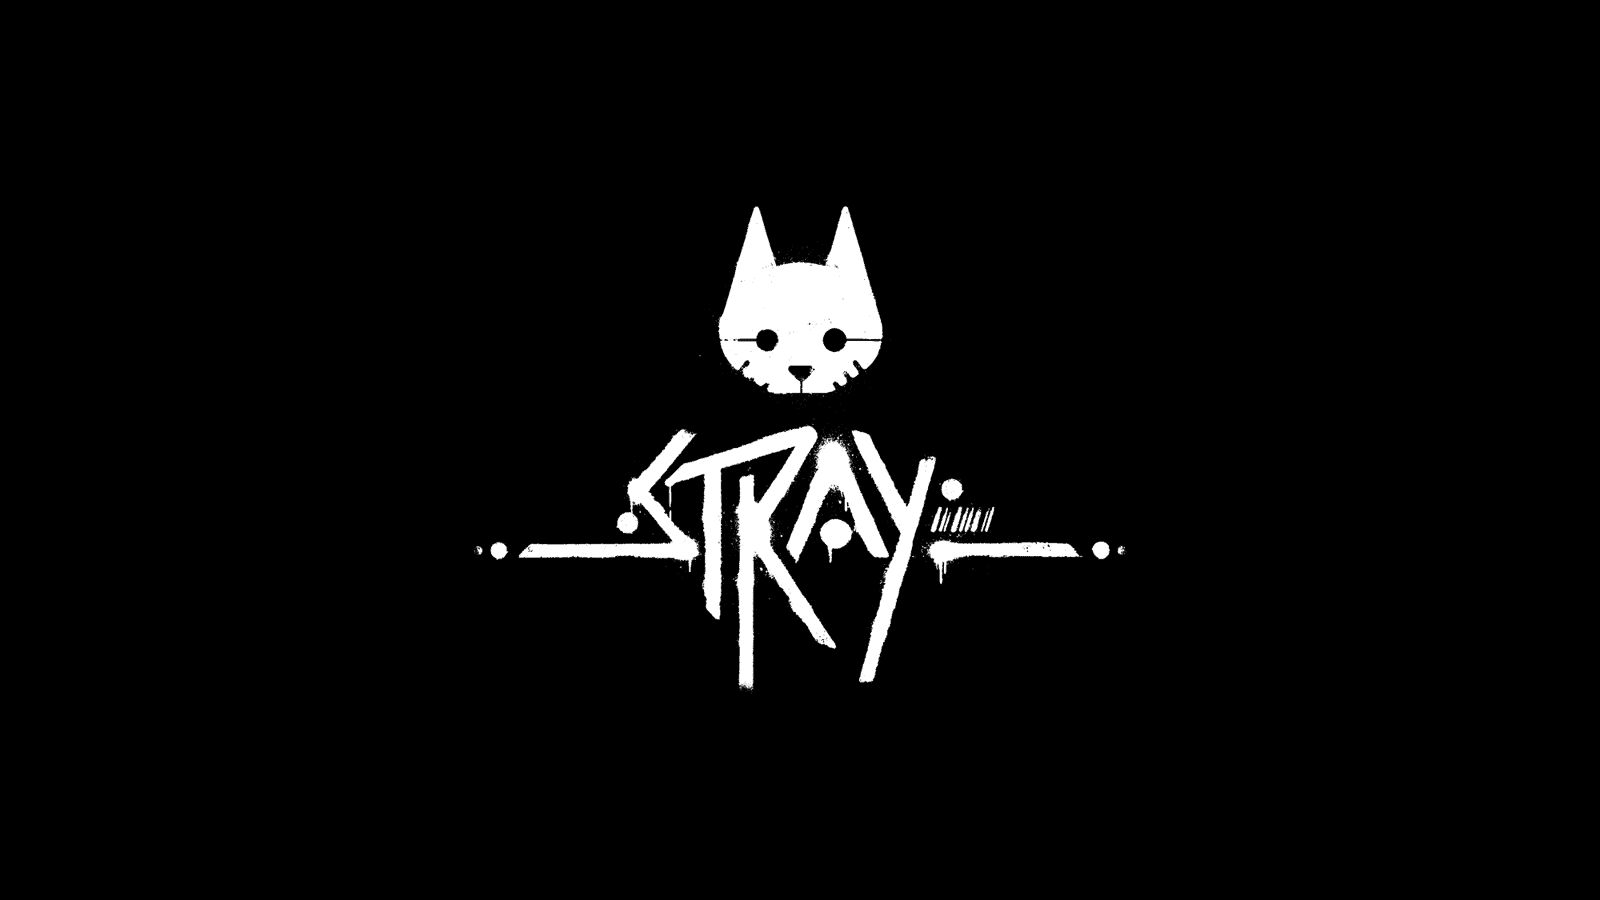 Stray Is On Xbox Now, Just Like Your Cat